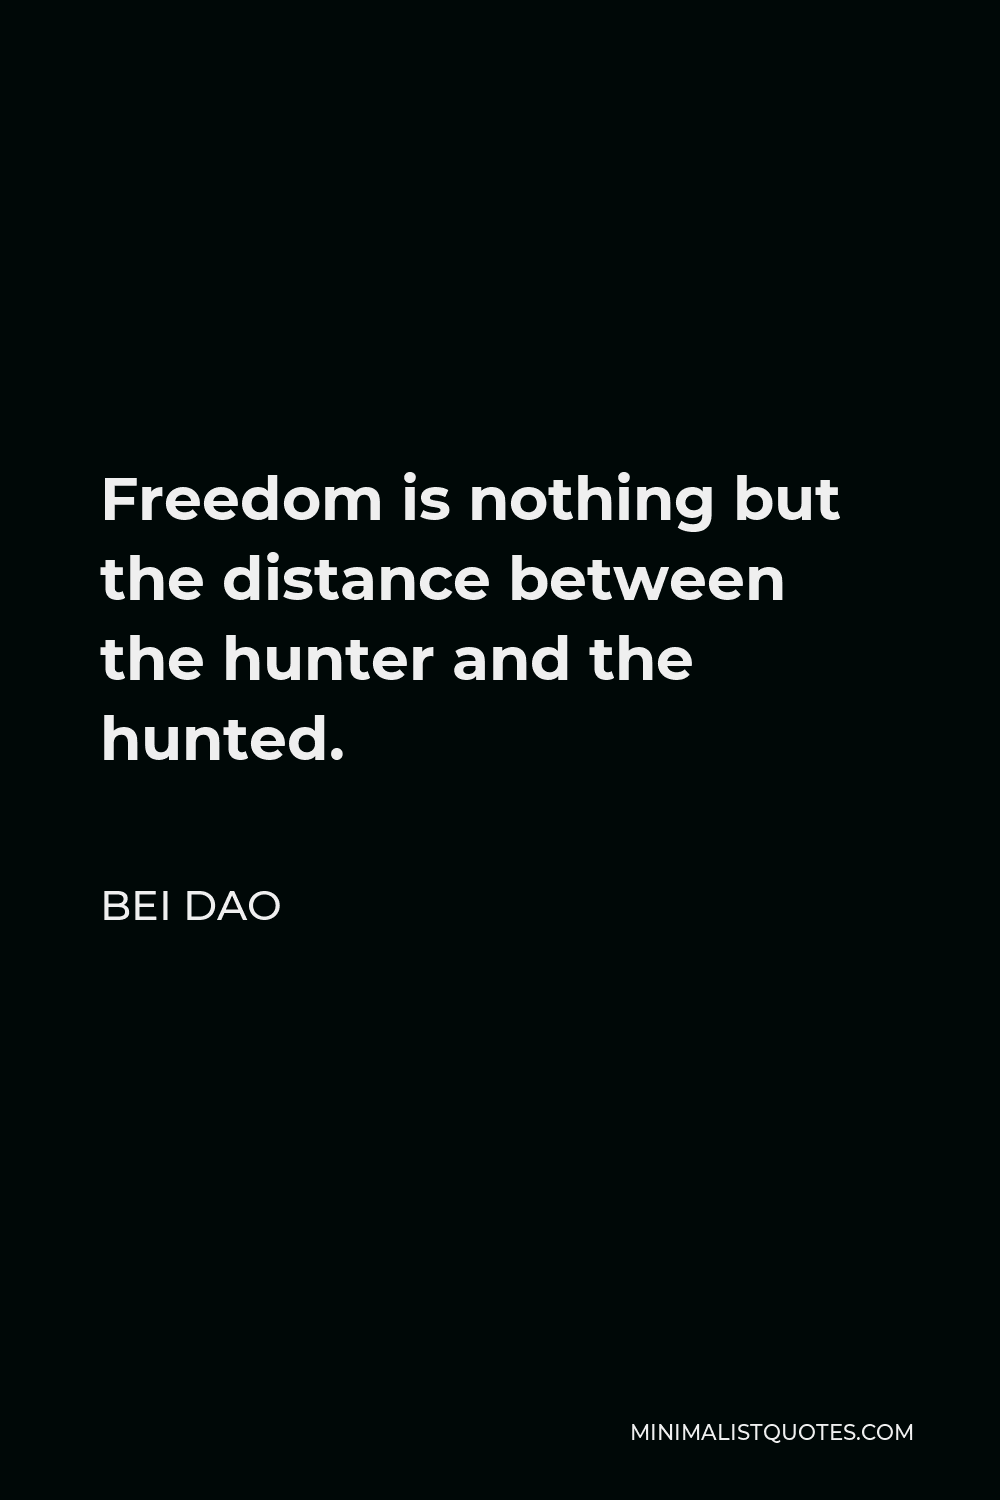 Bei Dao Quote - Freedom is nothing but the distance between the hunter and the hunted.